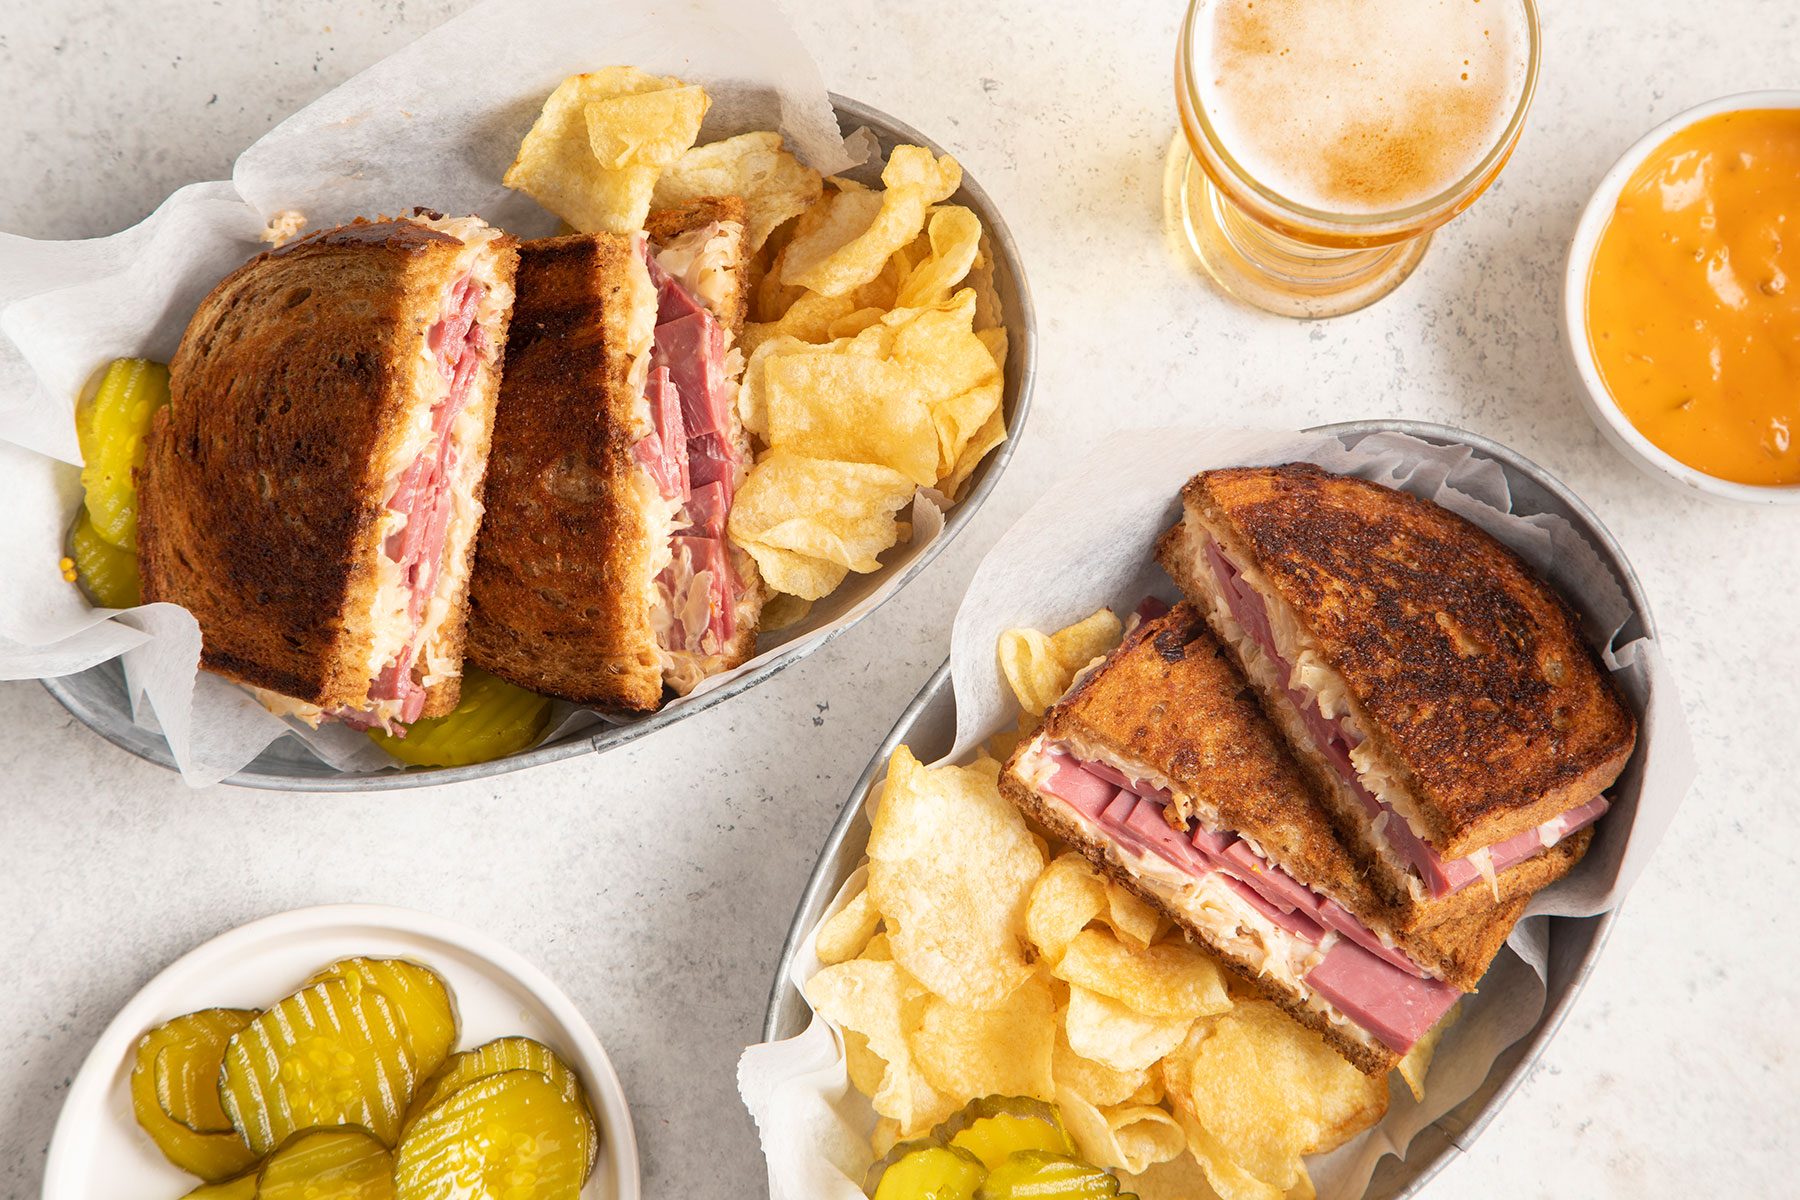 Corned Beef Sandwiches served on plate with beverage